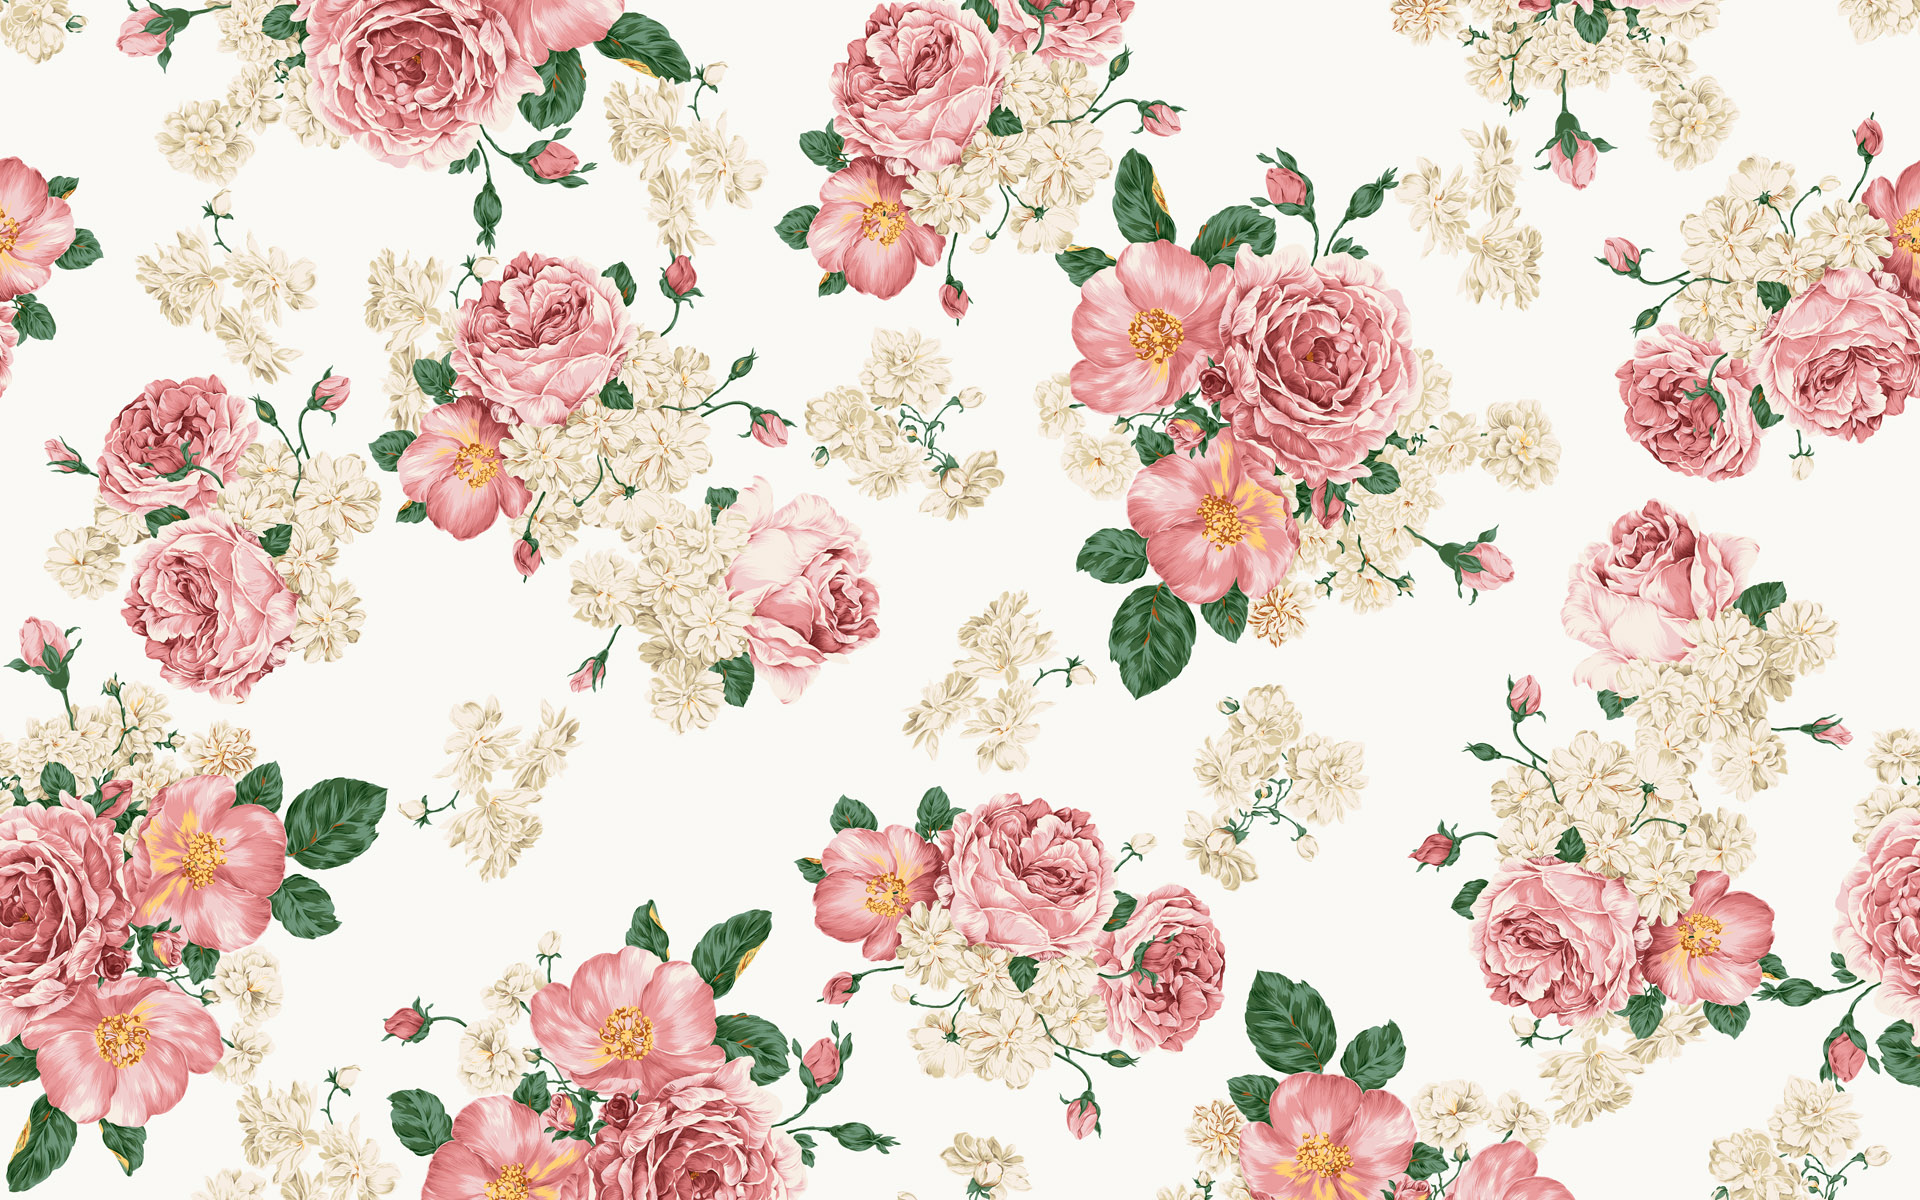 great rose vintage floral powerpoint background